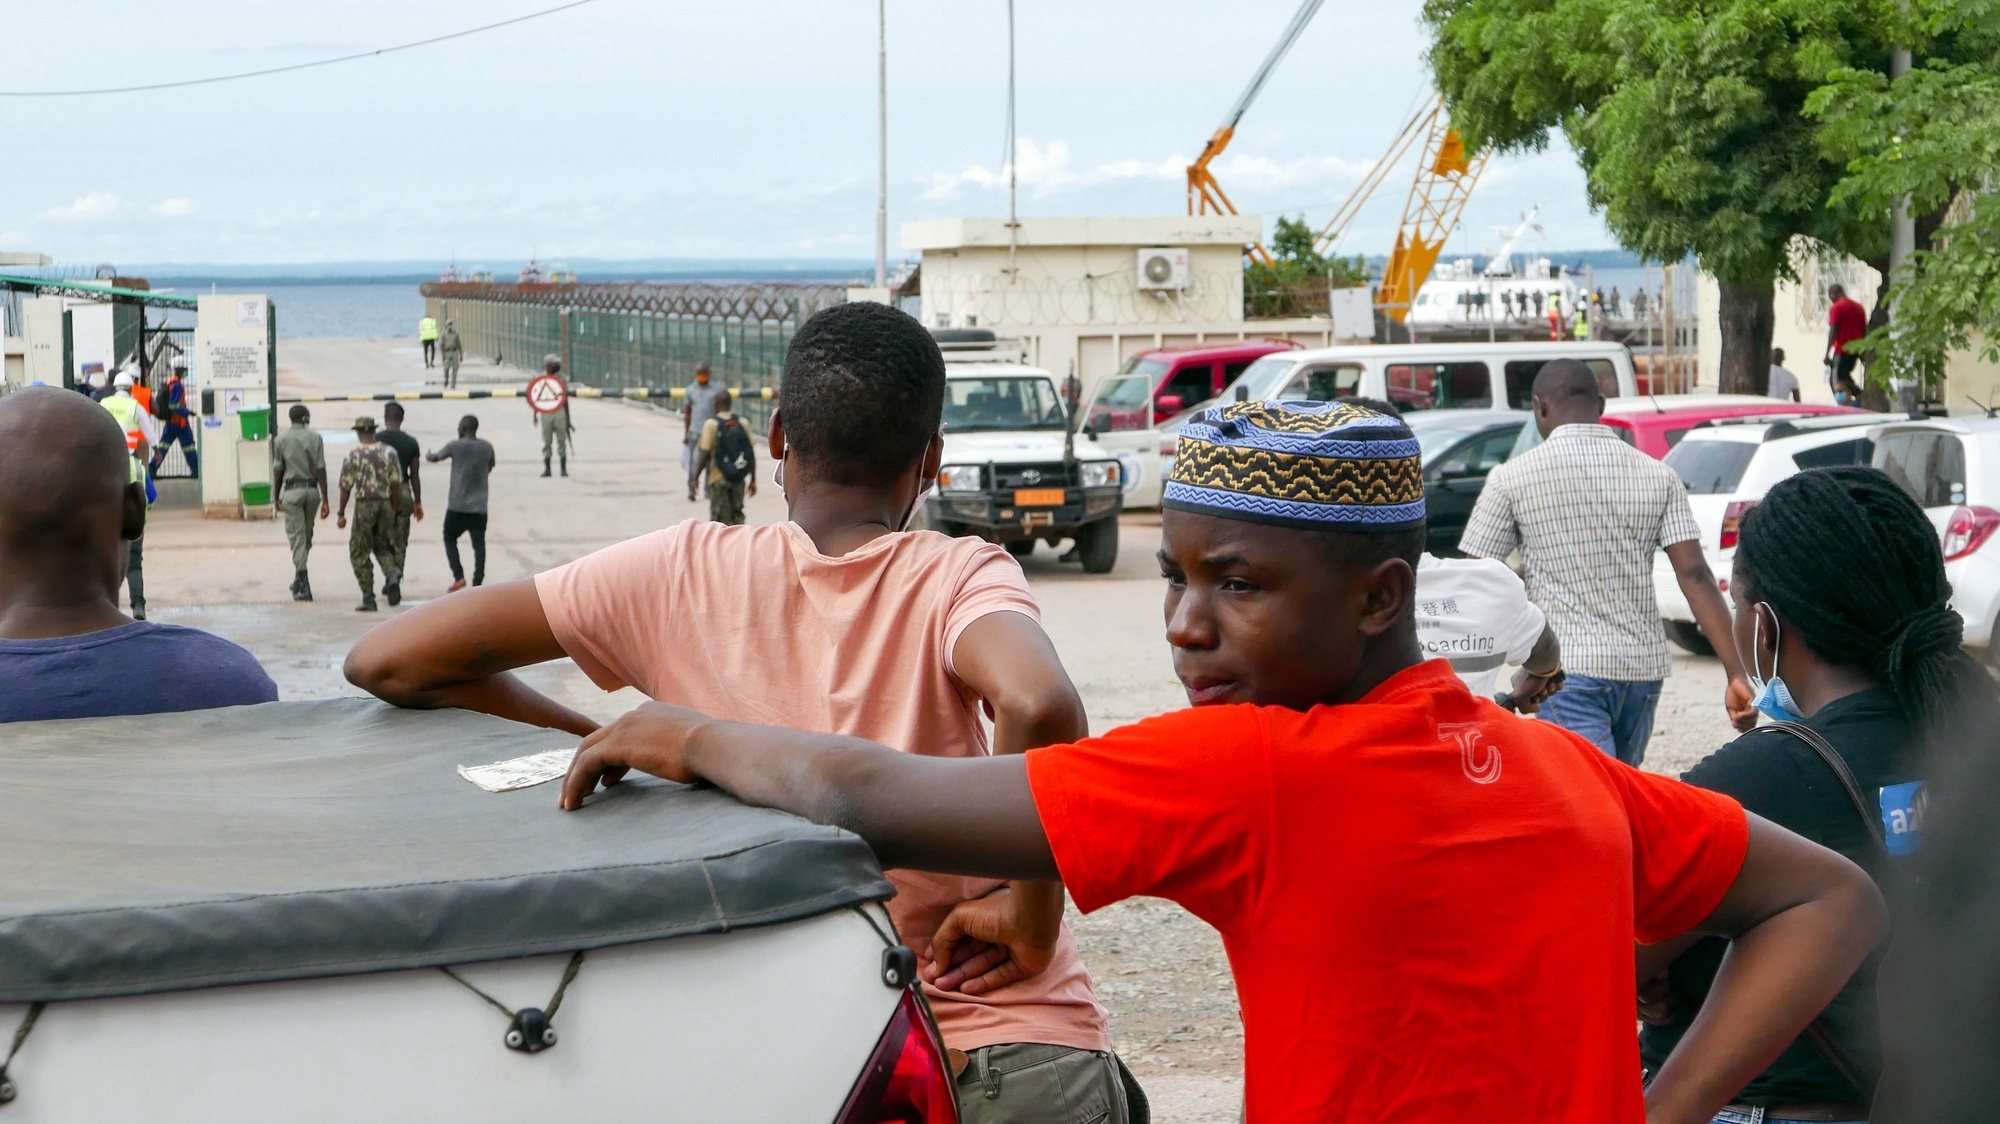 People wait for the arrival of more ships from Palma district, with people fleeing attacks by rebel groups since Wednesday, in Pemba, Mozambique, 29 March 2021. LUIS MIGUEL FONSECA/LUSA